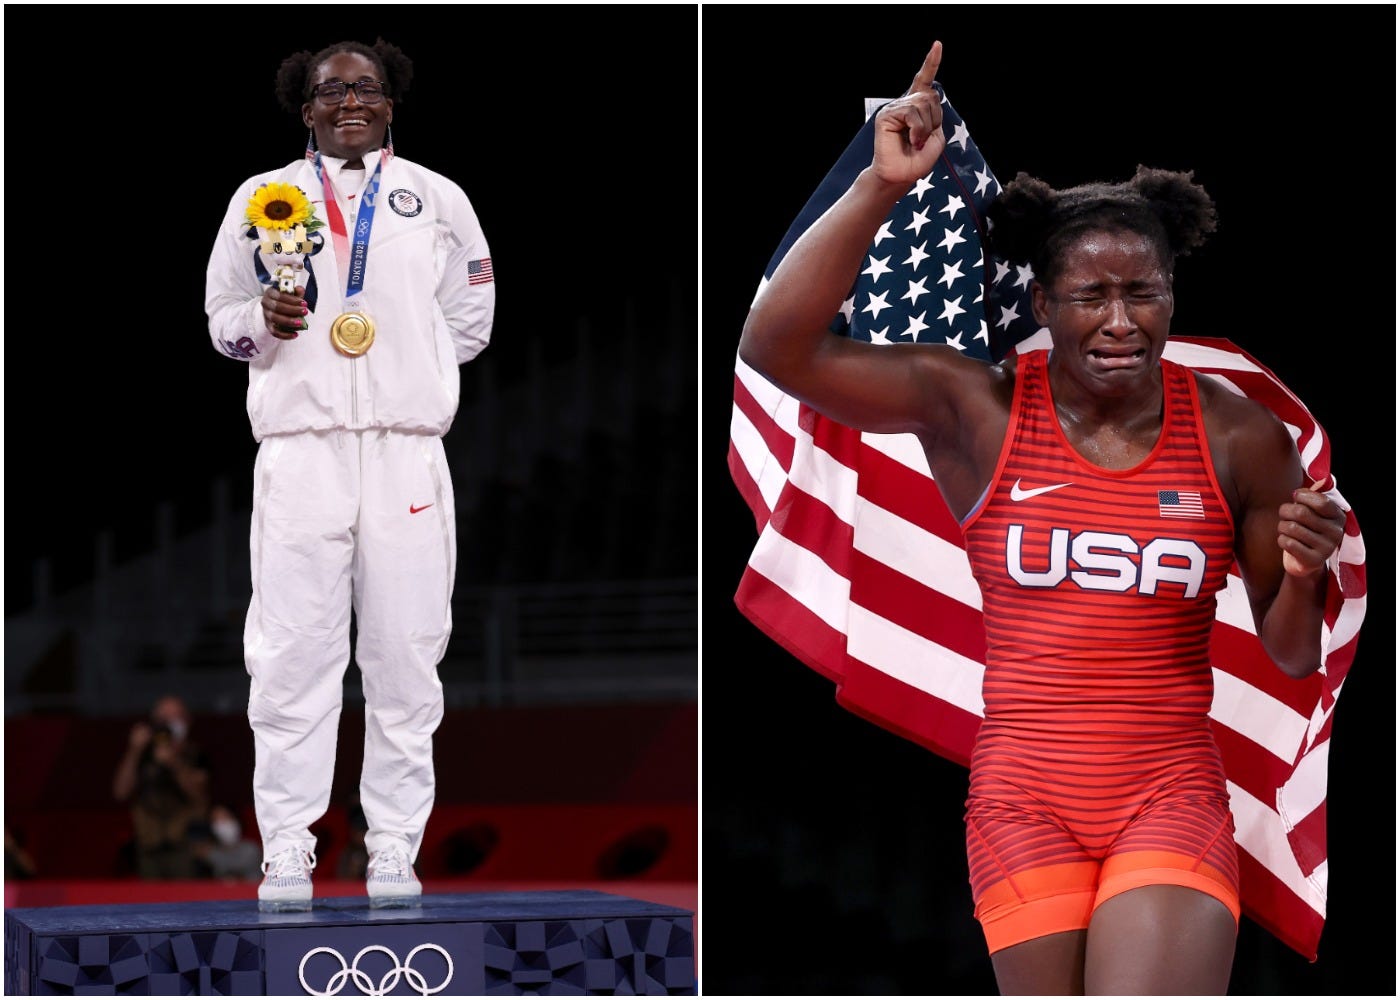 Team USA's Olympic gold medalist in wrestling Tamyra Mensah-Stock pictured wearing her gold medal on the podium and carrying the American flag after winning her match.